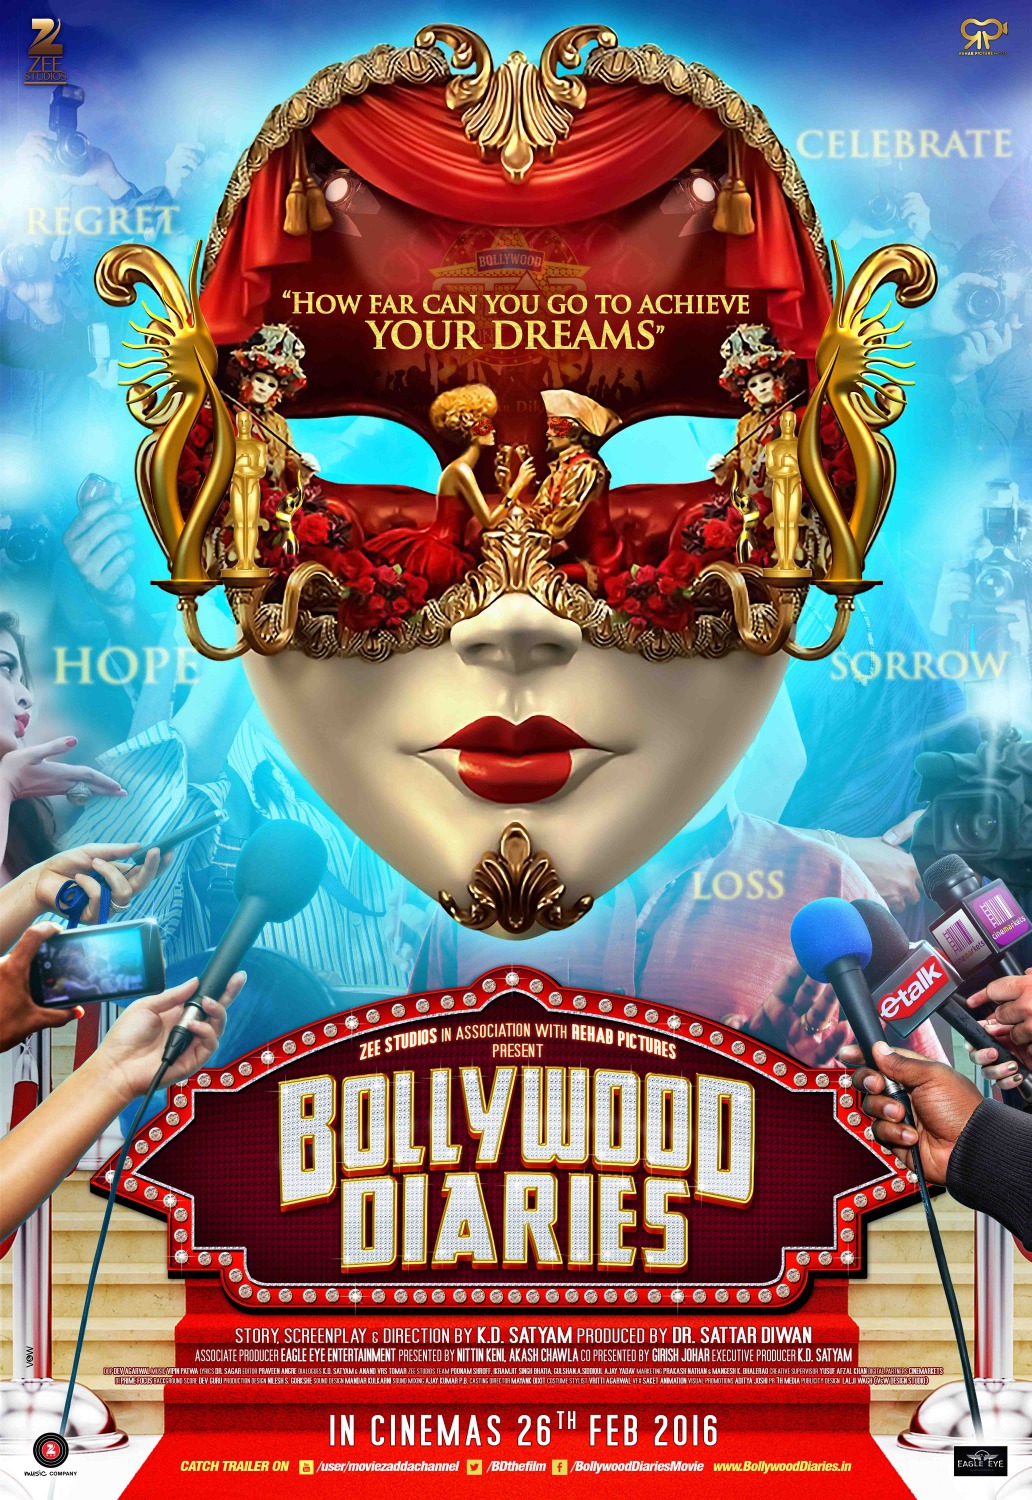 Extra Large Movie Poster Image for Bollywood Diaries (#10 of 11)